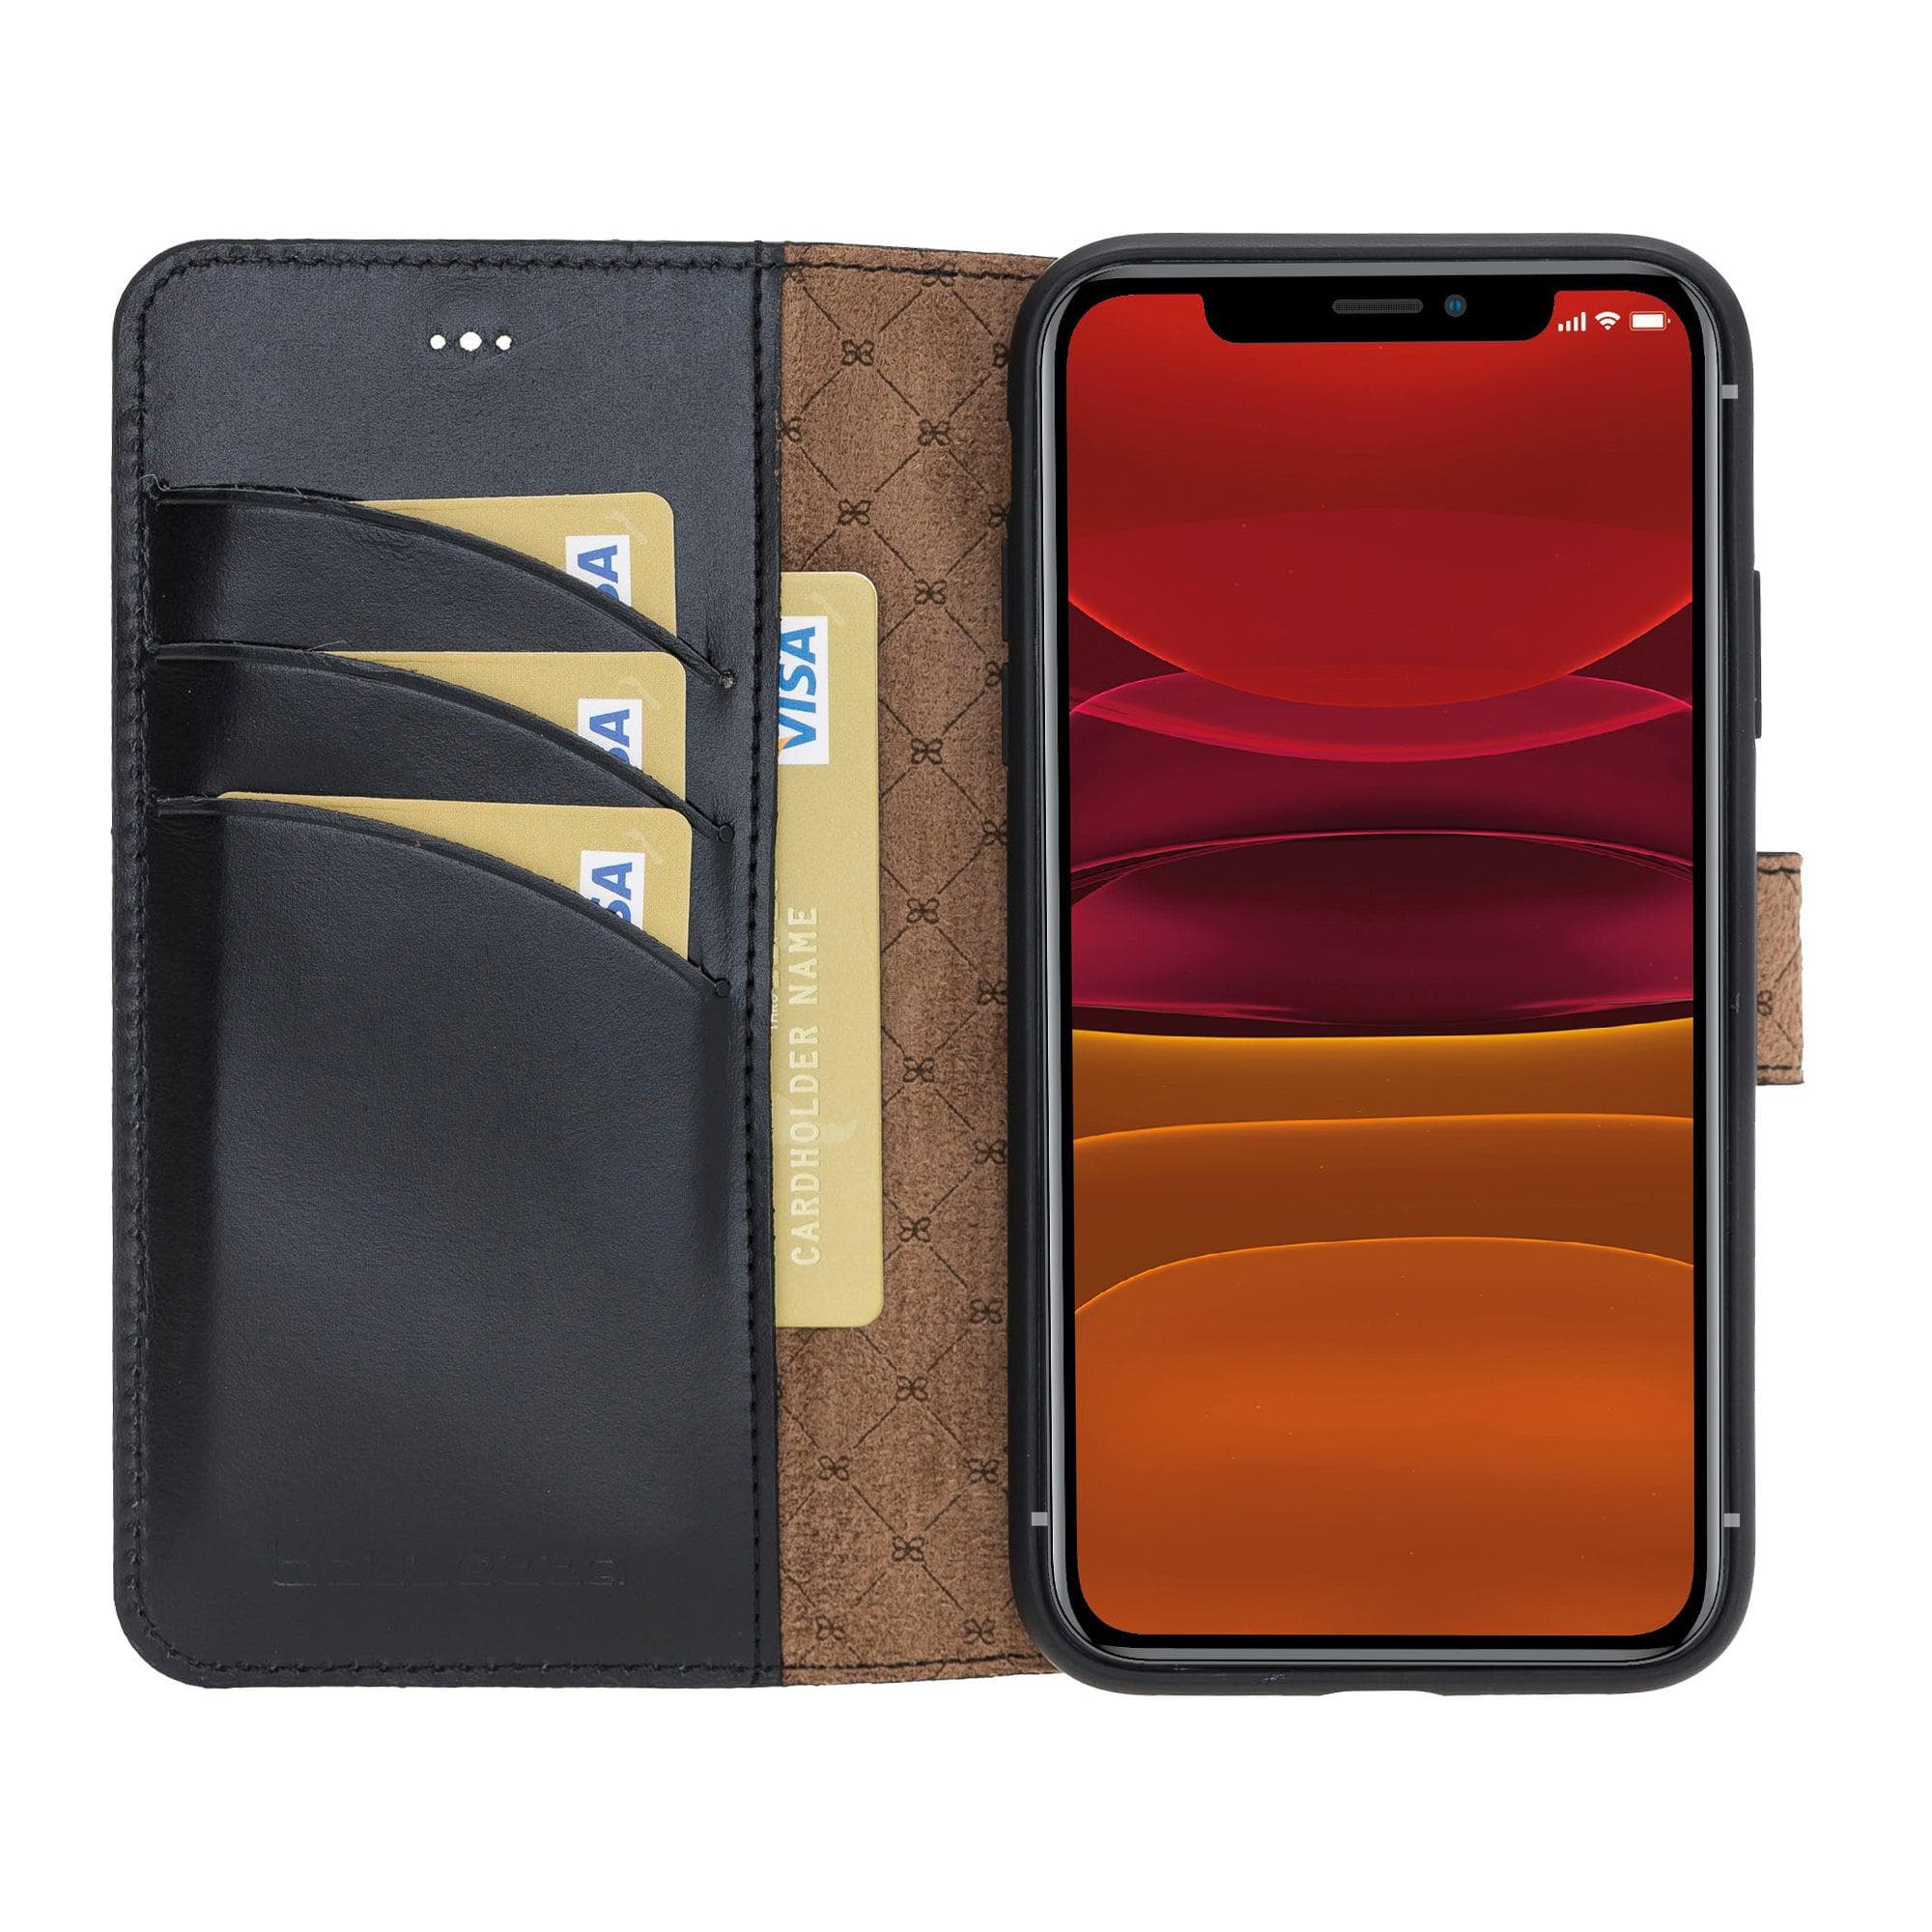 Mobile Phone Cases Wallet Folio with ID Slot Leather Wallet Case For Apple iPhone 11 Series Bouletta Shop